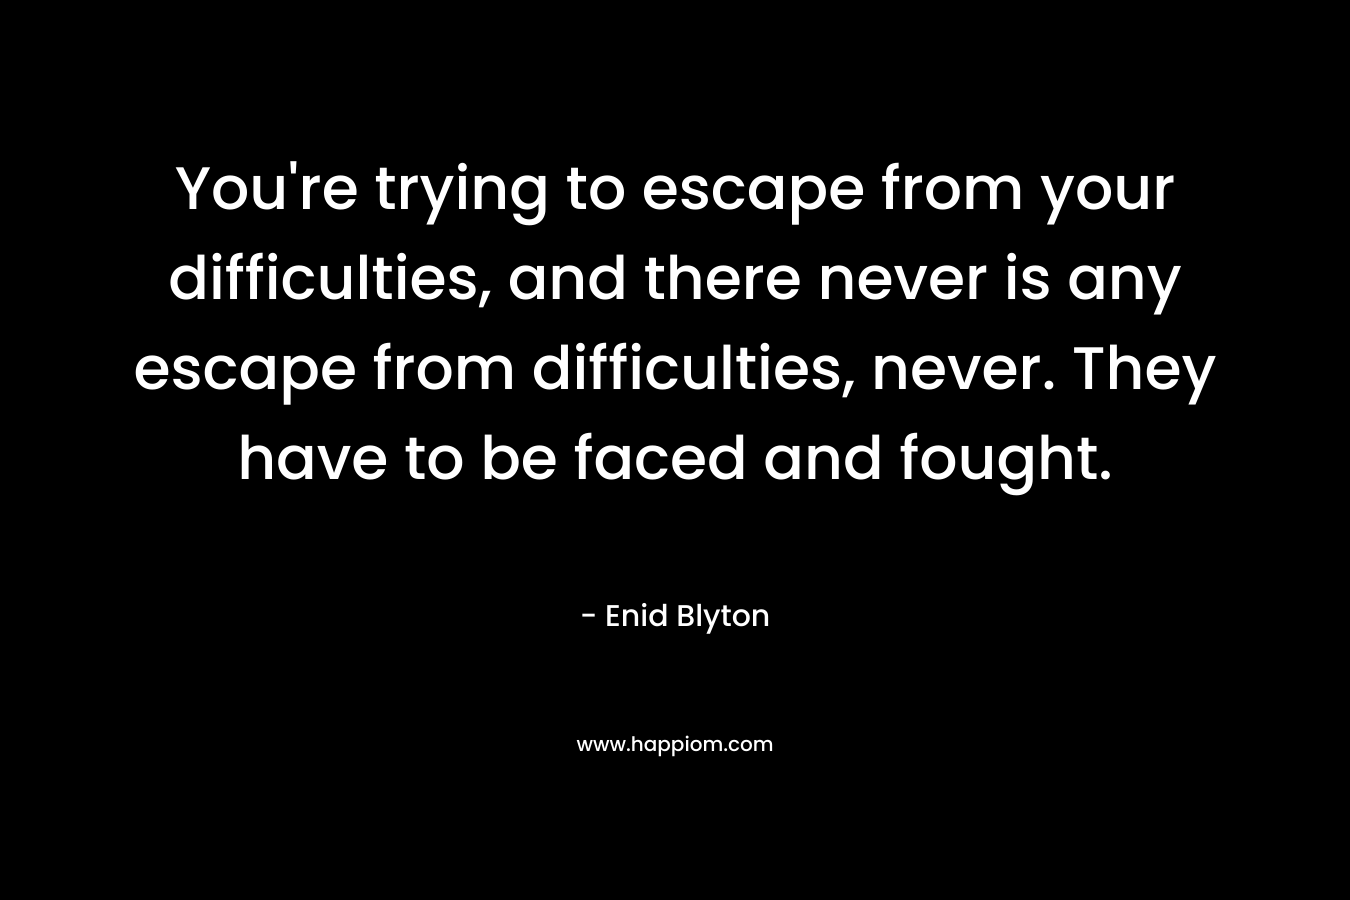 You're trying to escape from your difficulties, and there never is any escape from difficulties, never. They have to be faced and fought.